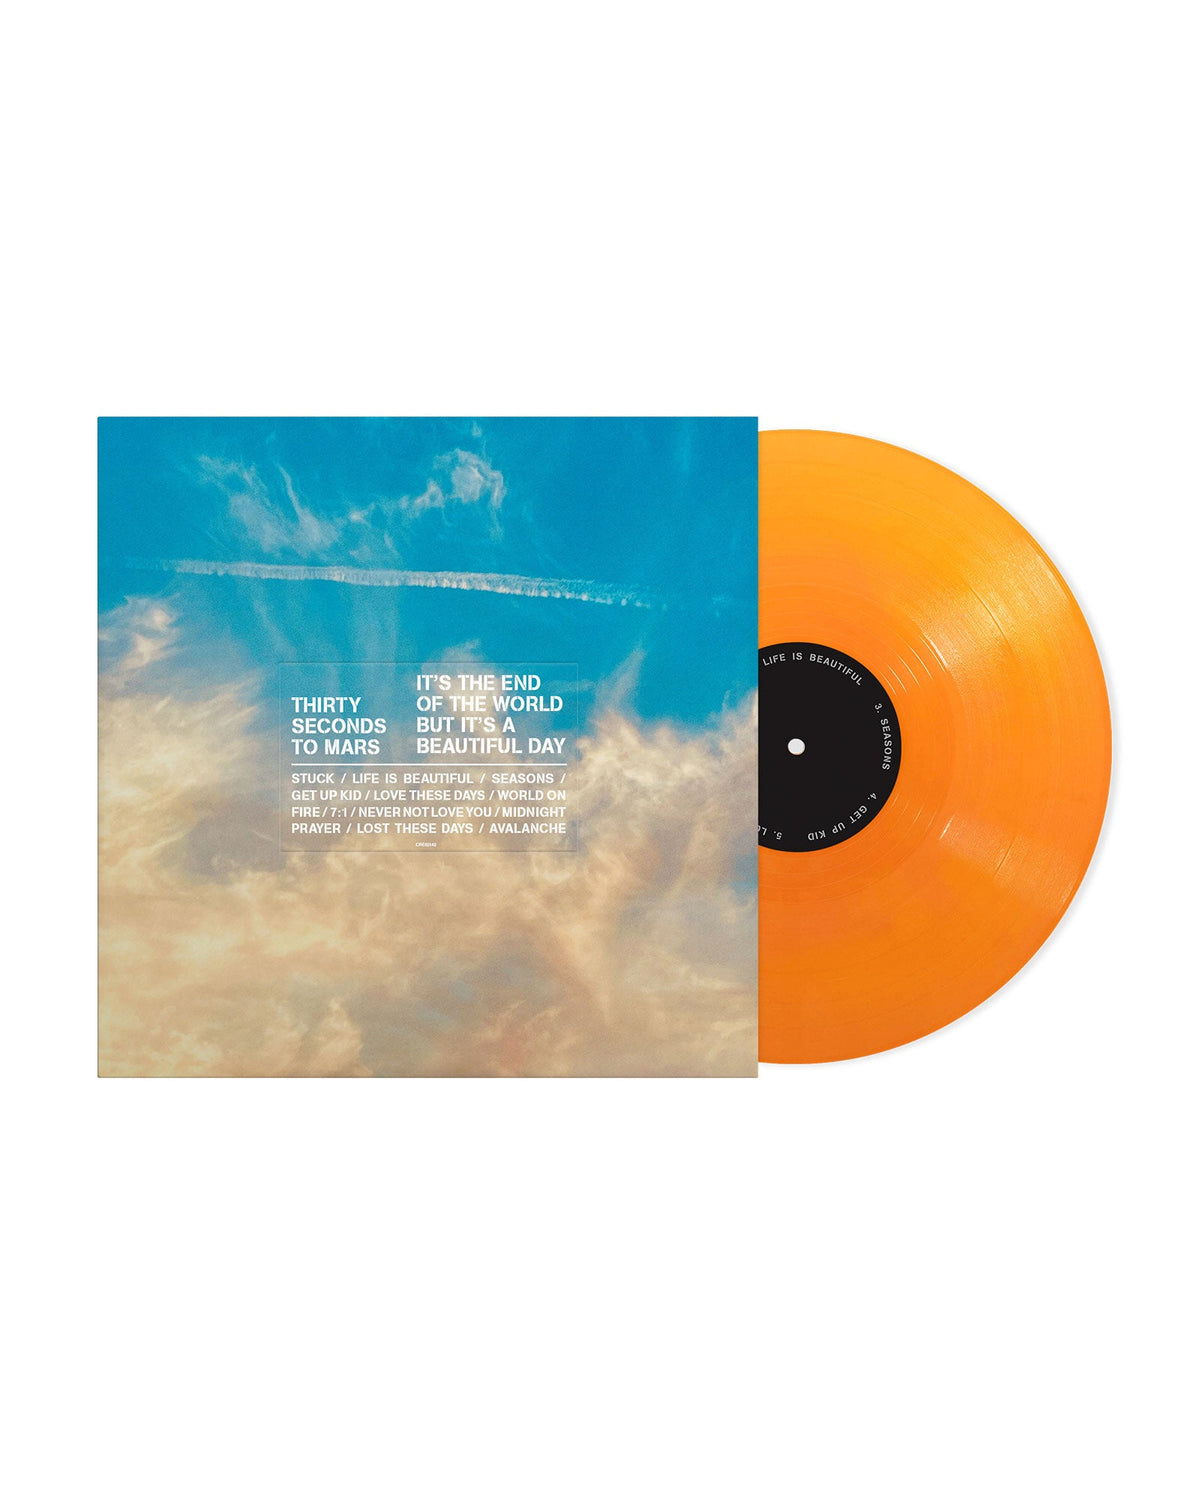 Thirty Seconds to Mars - LP Vinilo Color "It’s The End Of The World But It’s A Beautiful Day” - D2fy · Rocktud - Rocktud